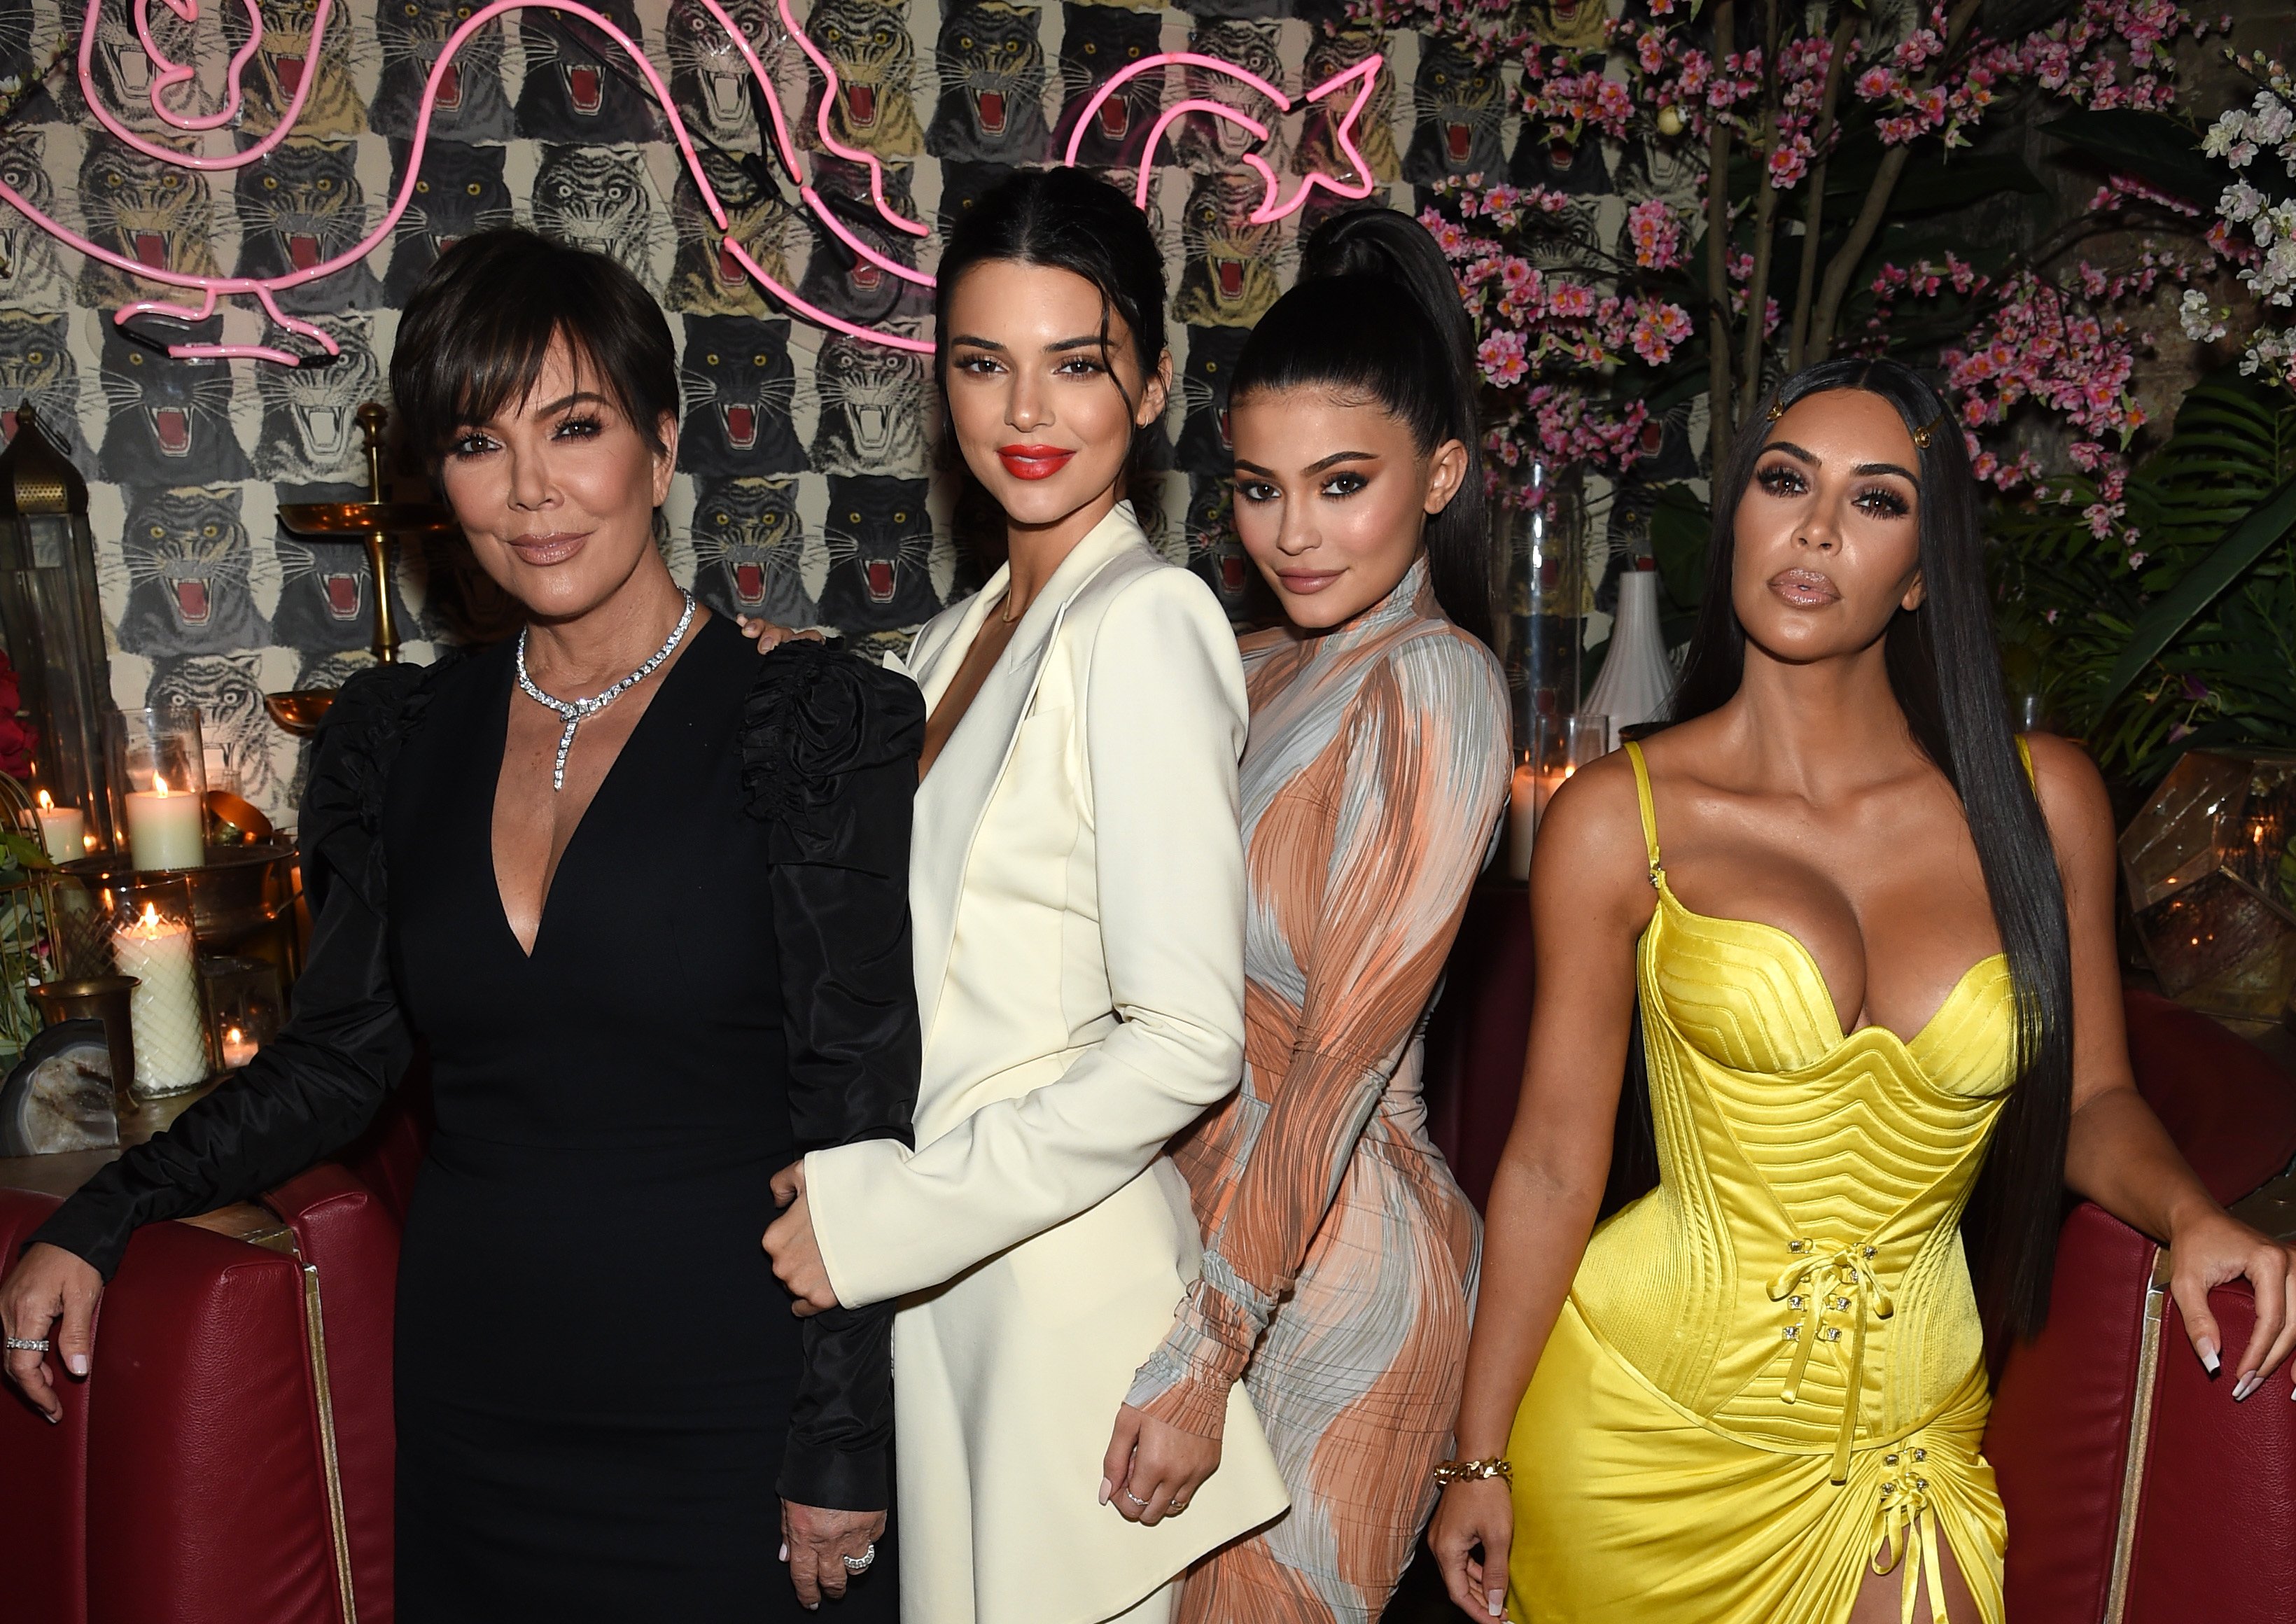 Momager Kris Jenner smiling at dinner party while standing next to three of her daughters Kendall Jenner, Kylie Jenner, and Kim Kardashian West